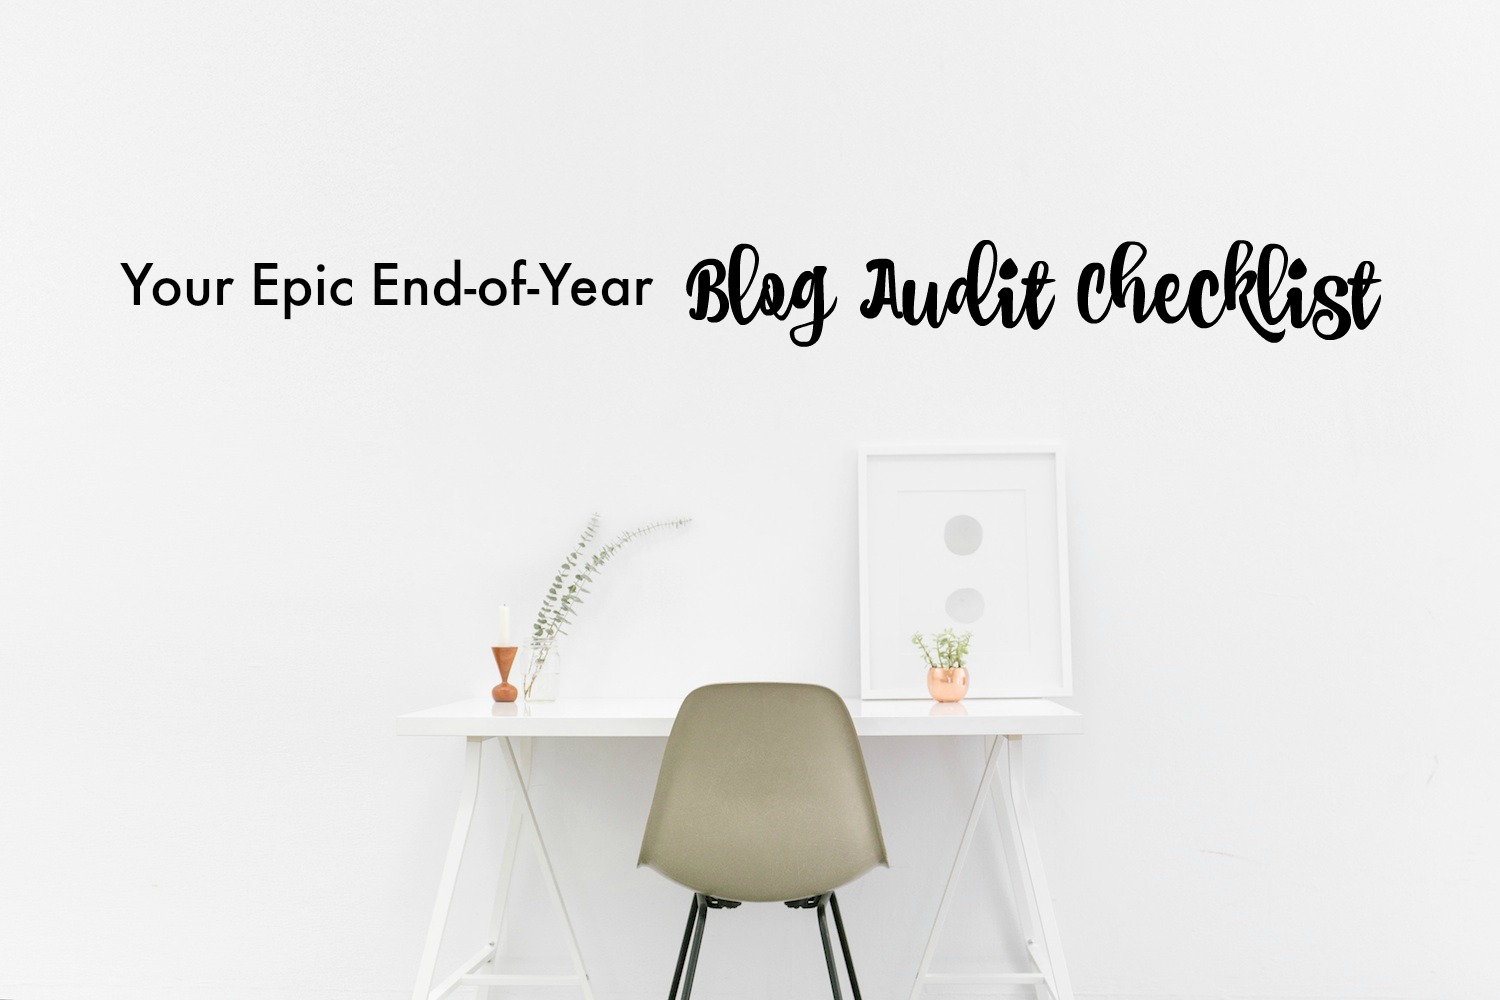 Your Epic End-of-Year Blog Audit Checklist | Get it now on ProBlogger.net